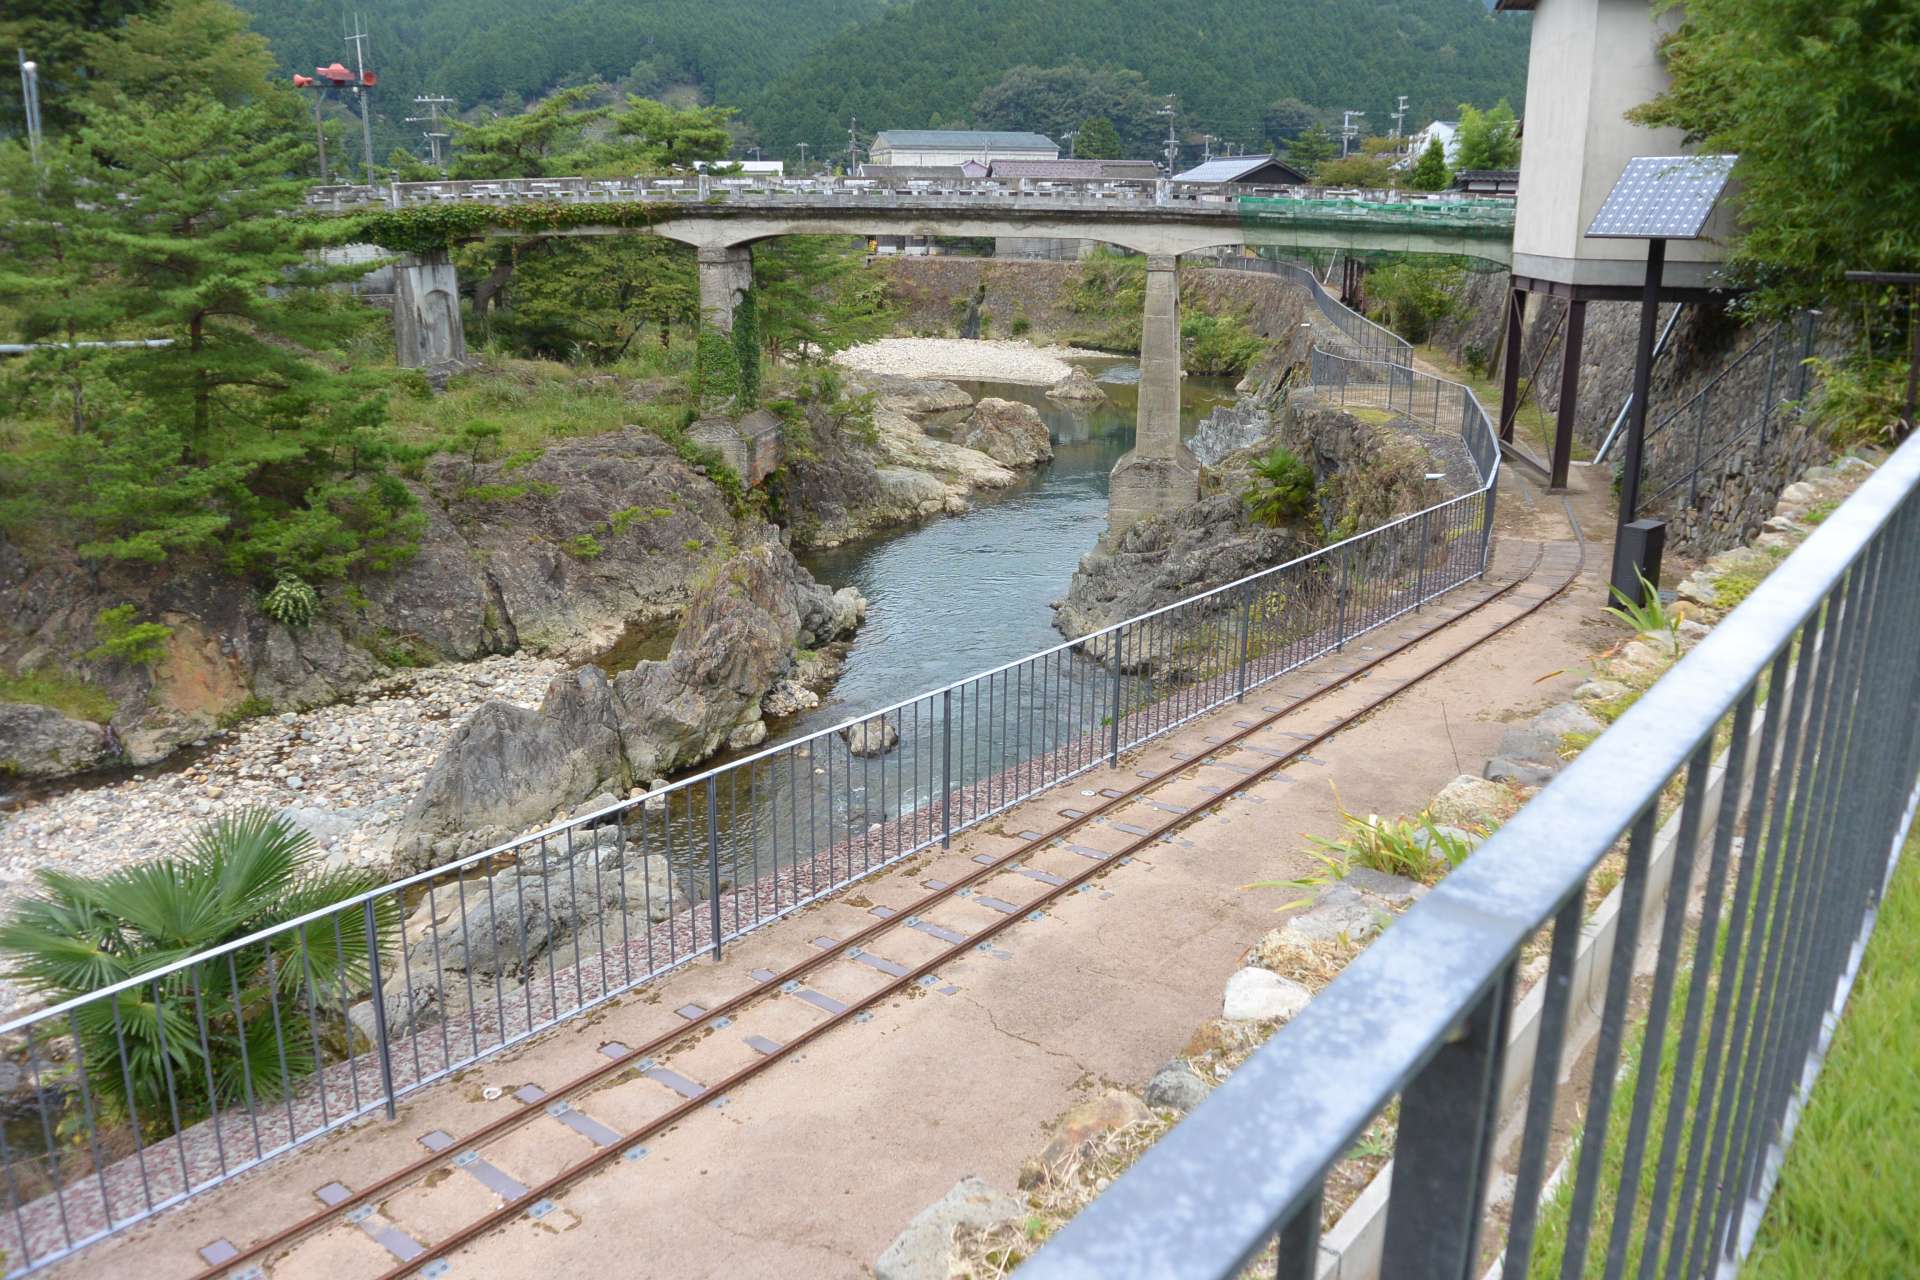 To transport silver, a road was set up between Ikuno and Himeji around the 1870s, which was Japan’s first industrial highway. You can still see the historical and cultural road that supported the prosperity of the Ikuno silver mine and the mining town. 